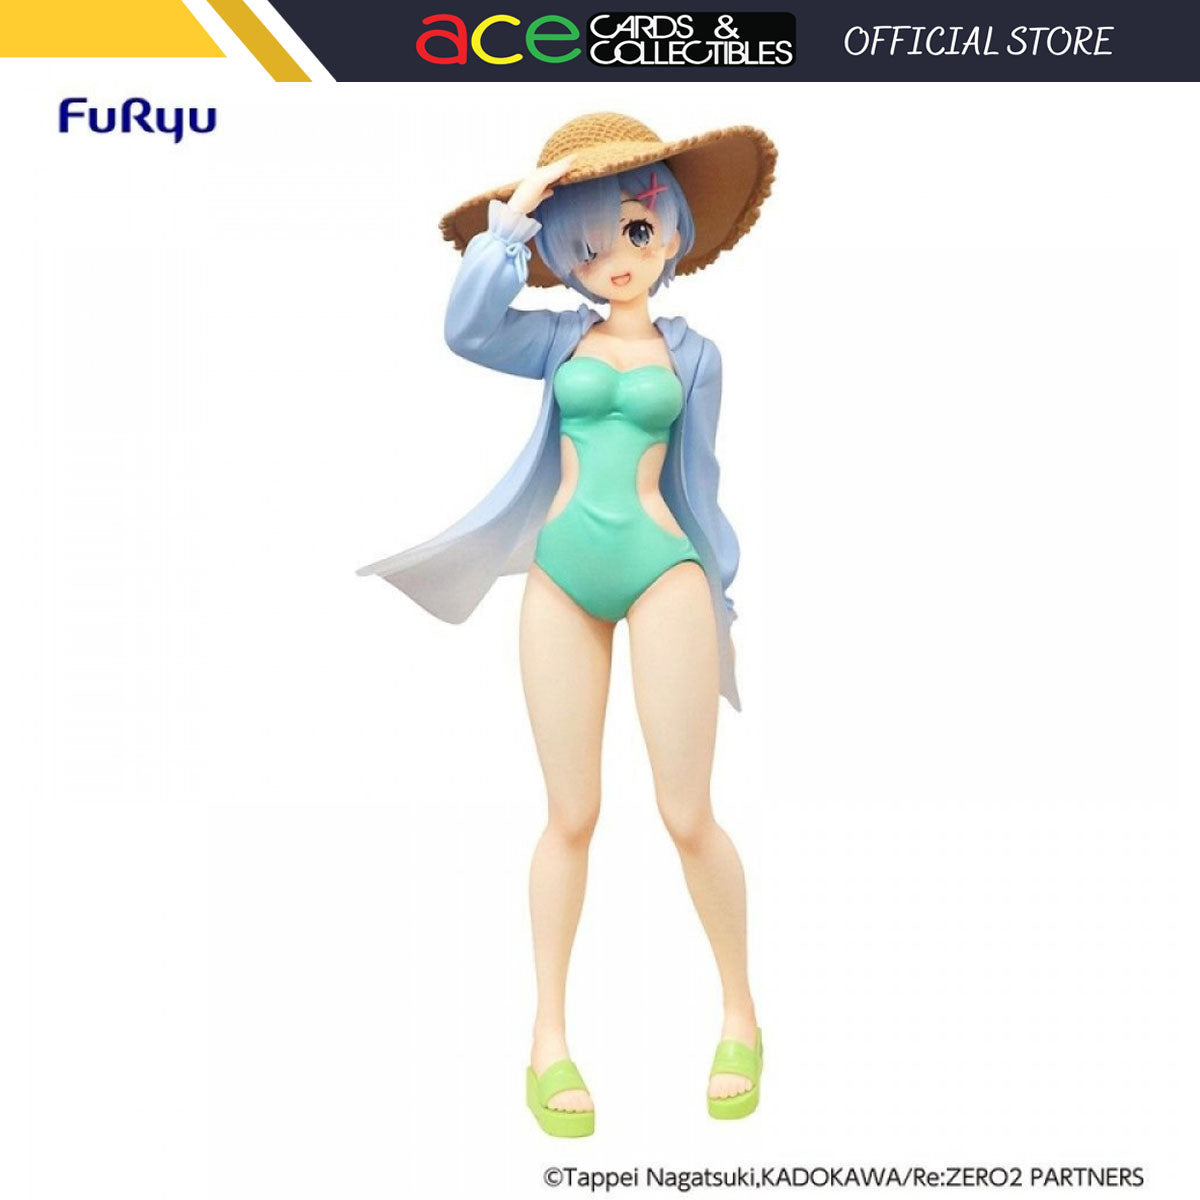 Re:Zero -Starting Life In Another World- SSS Figure "Rem" (Summer Vacation Ver.)-FuRyu-Ace Cards & Collectibles